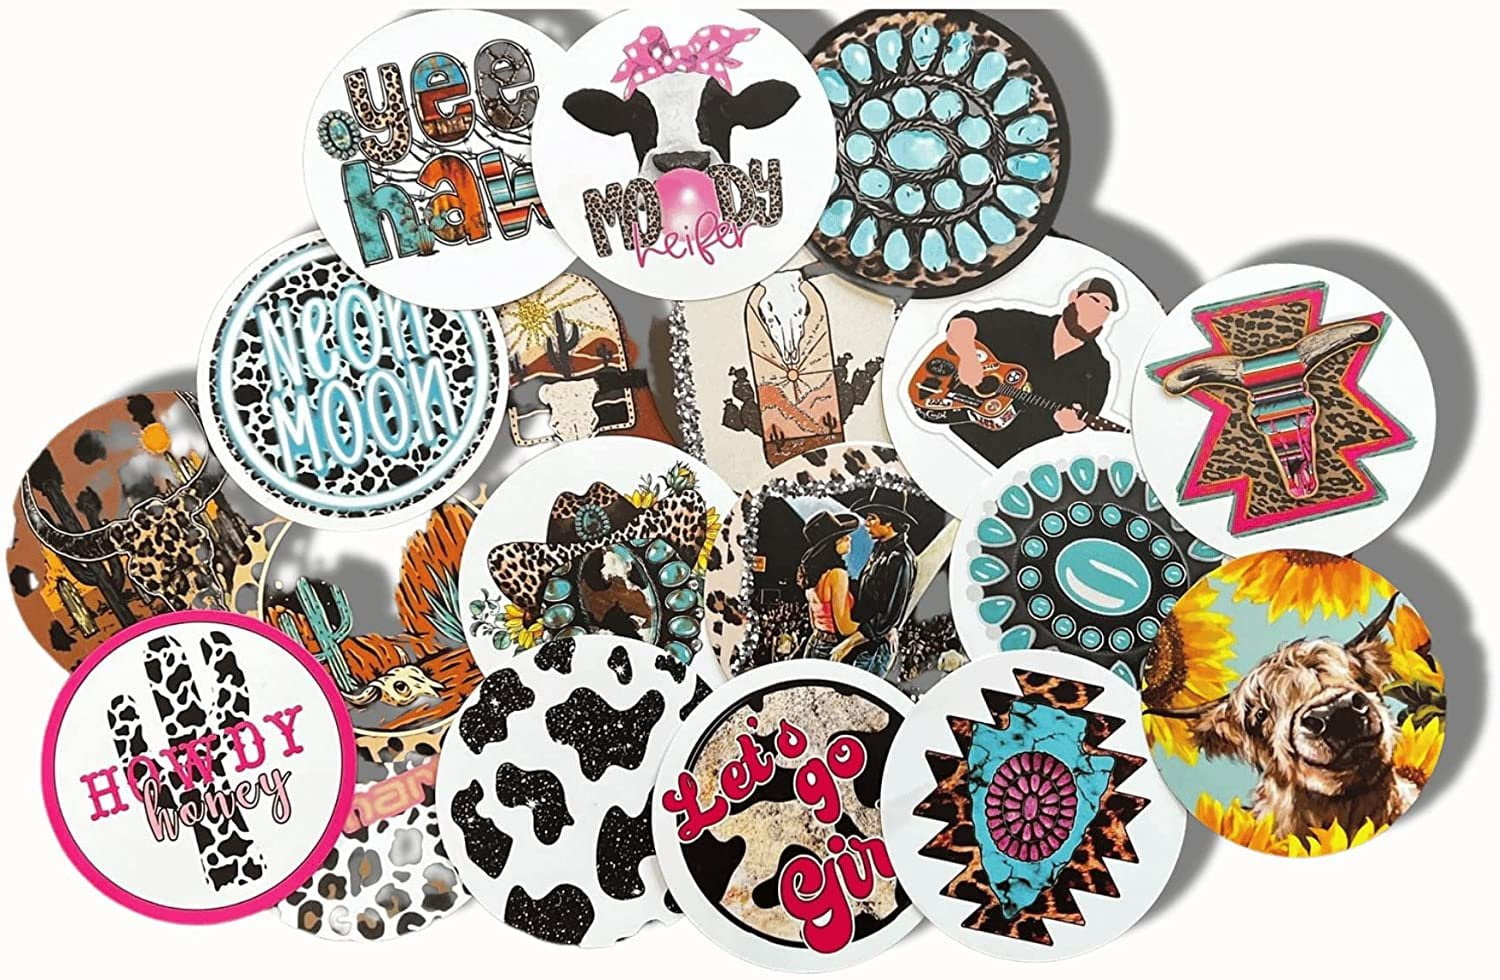 Freshie Occupation Cardstock Cutouts Rounds 3” inch for Freshies Random Mix | 12 Pk | for Scented Aroma Beads Bake with Mold for Car Freshie Designs